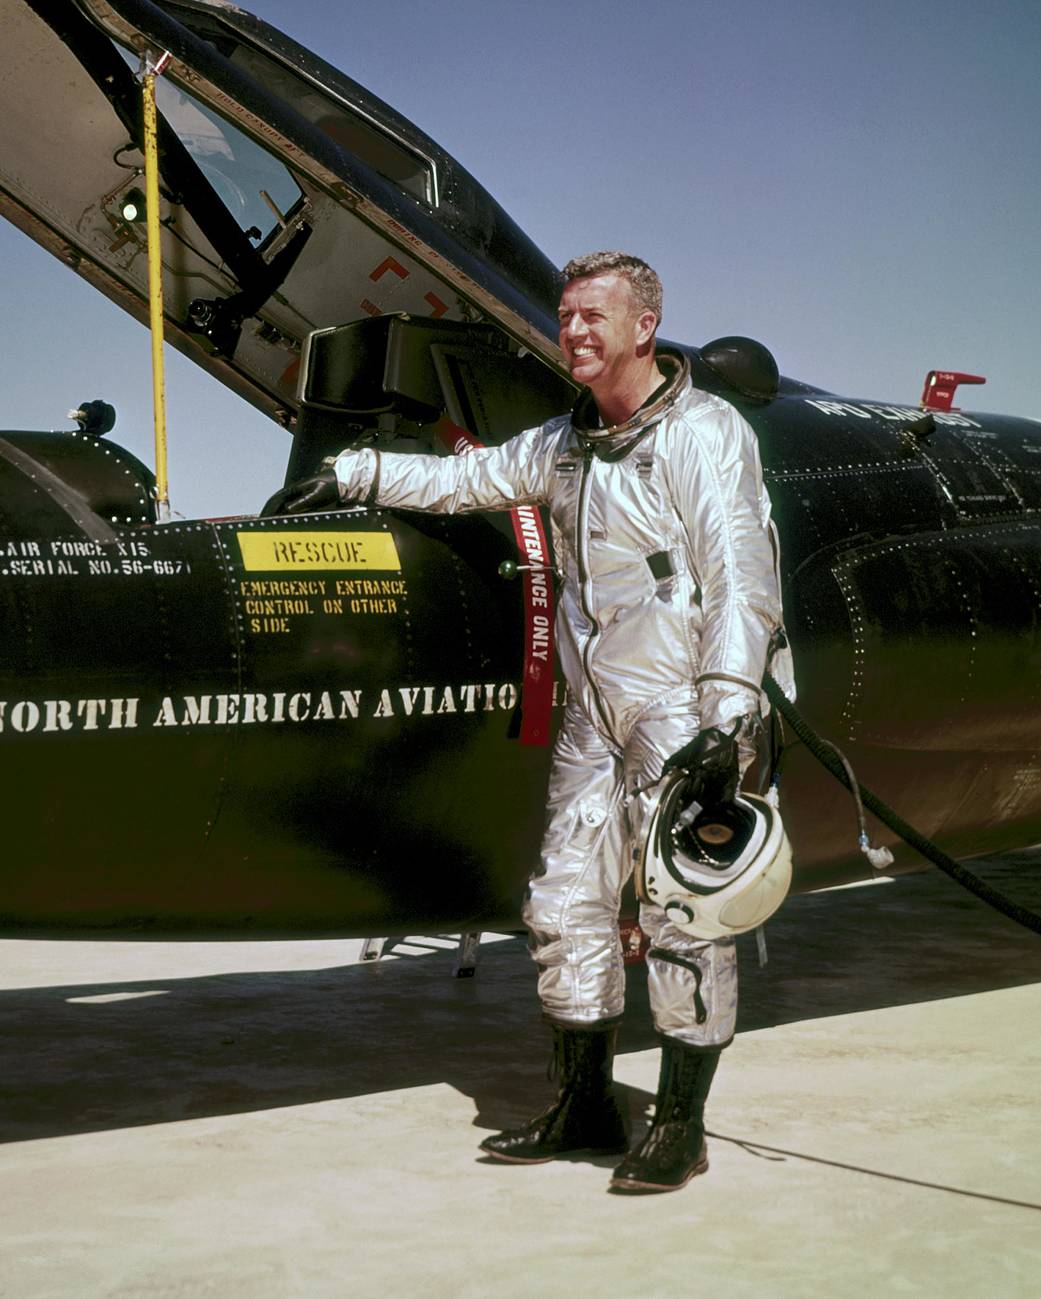 Joe Walker reached 354,200 feet in X-15 #3, the highest altitude reached by the X-15